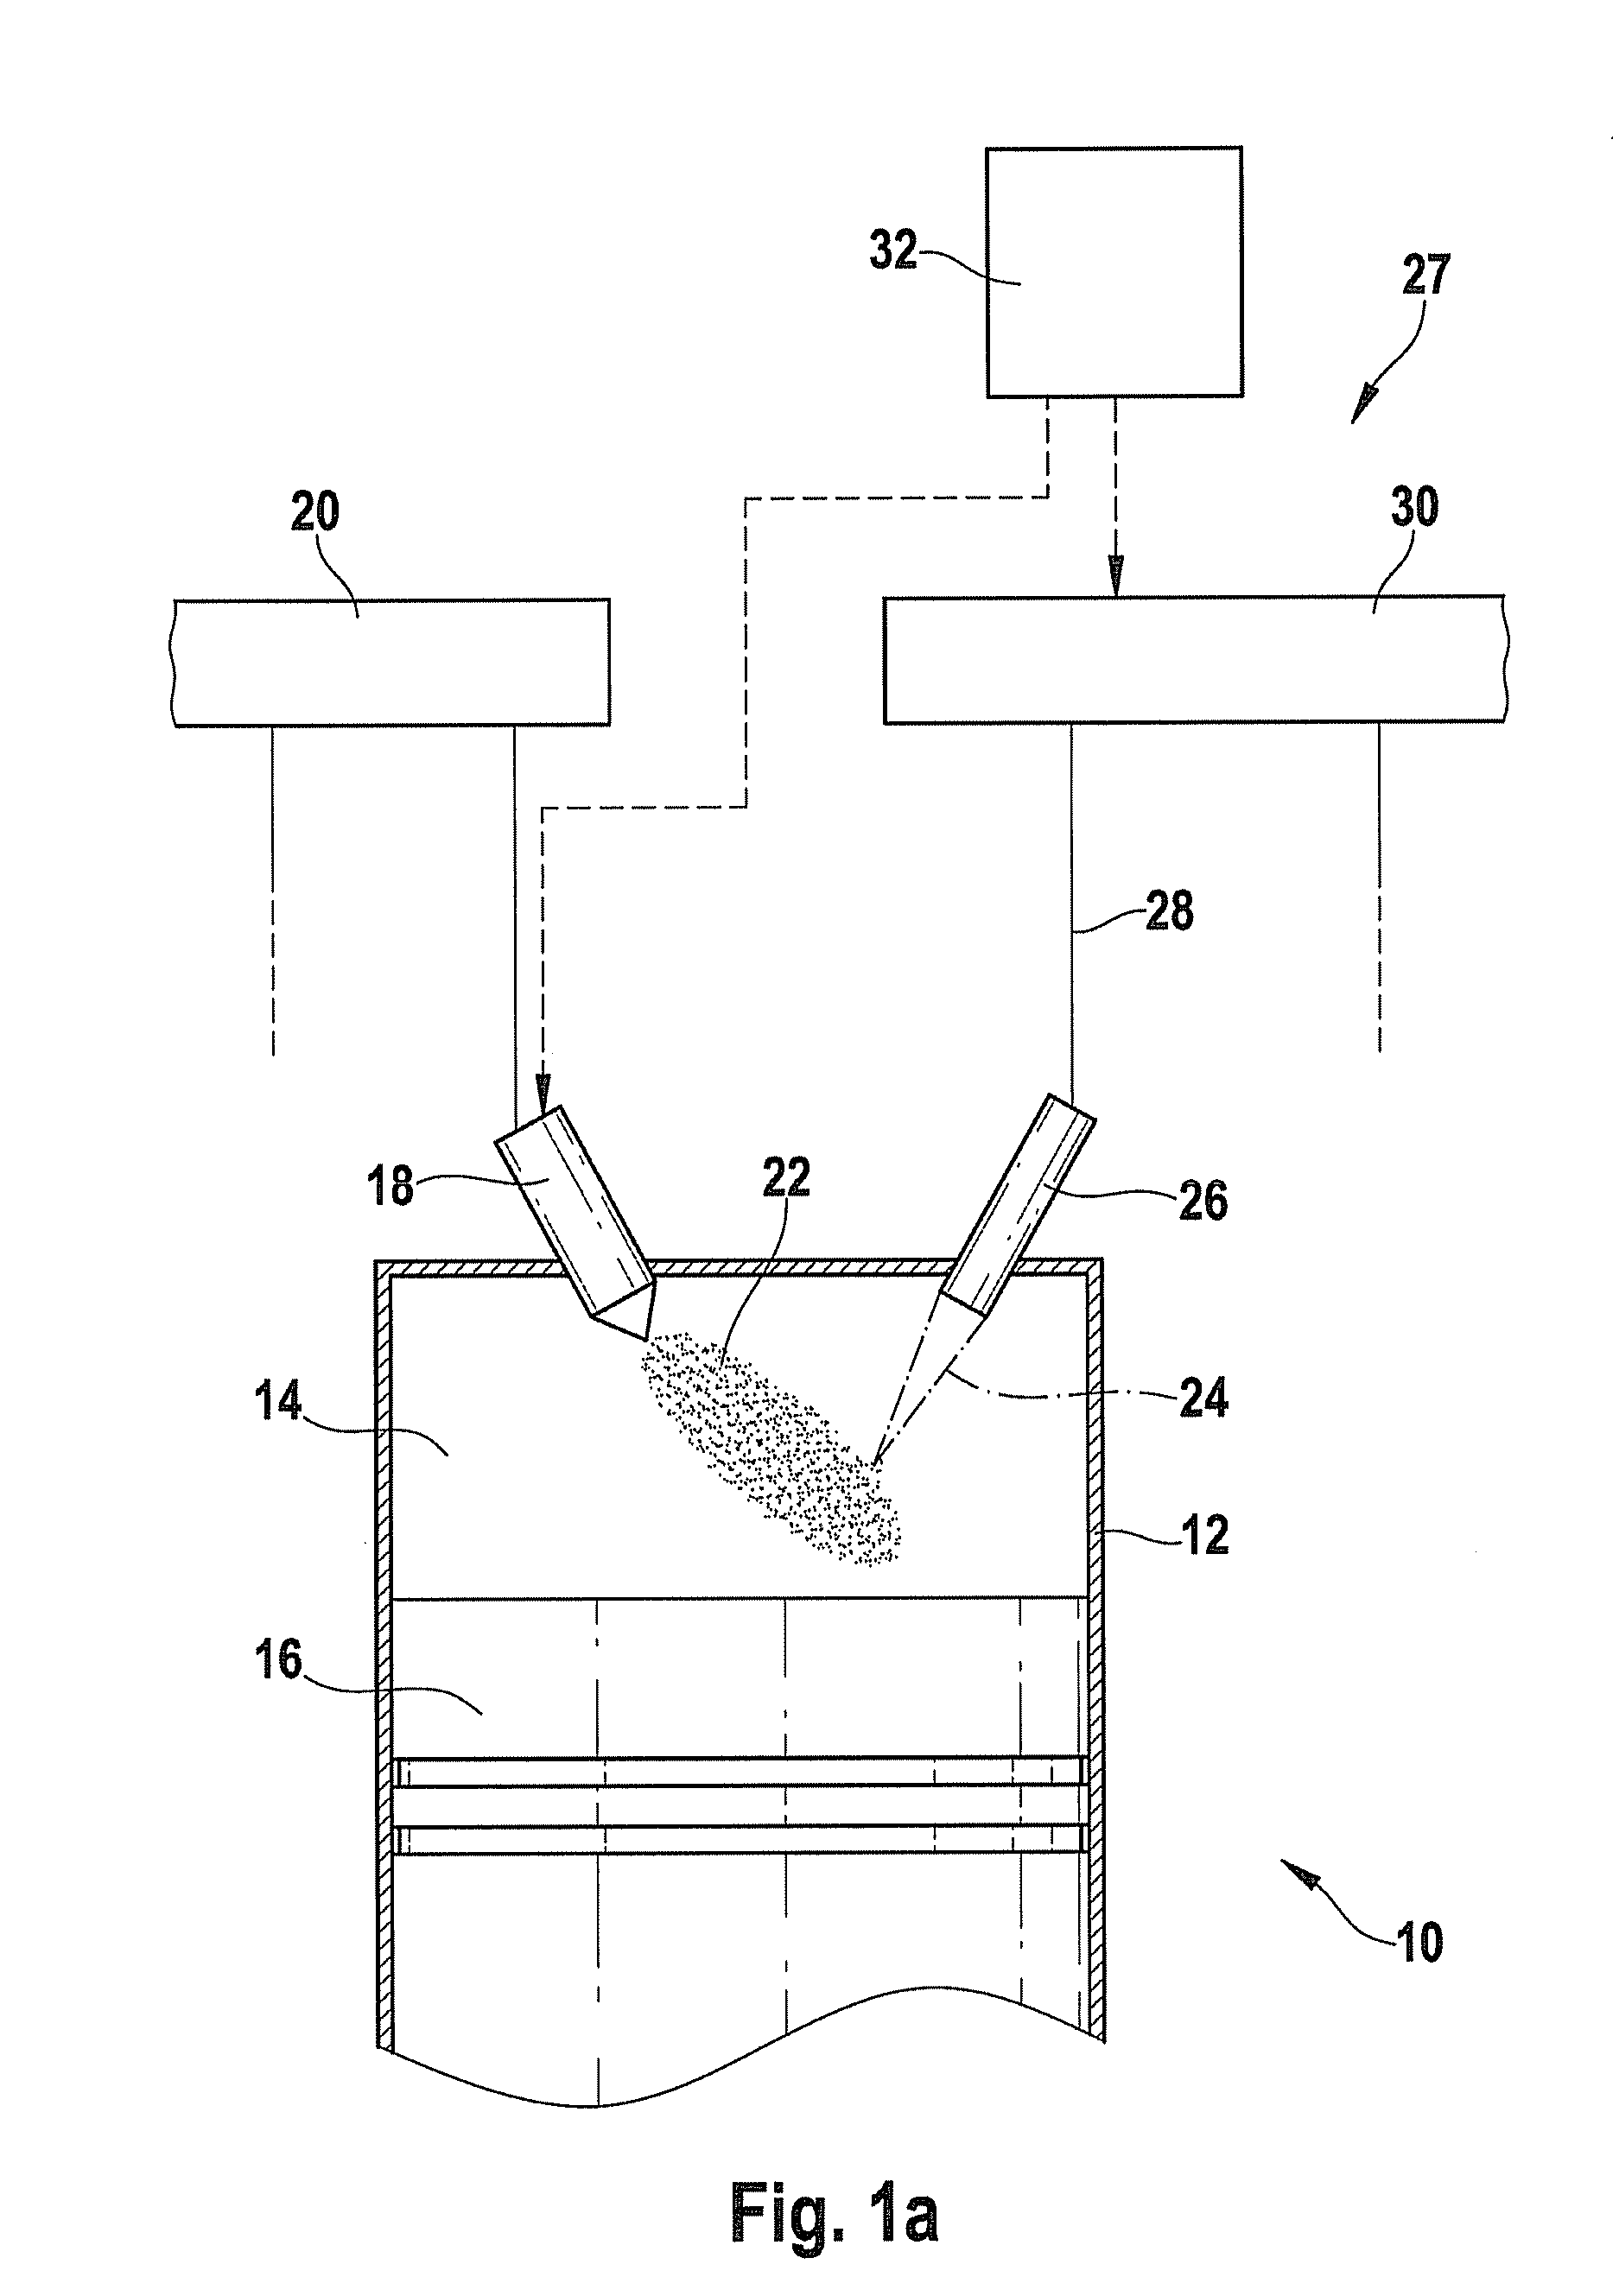 Laser device for the ignition device of an internal combustion engine